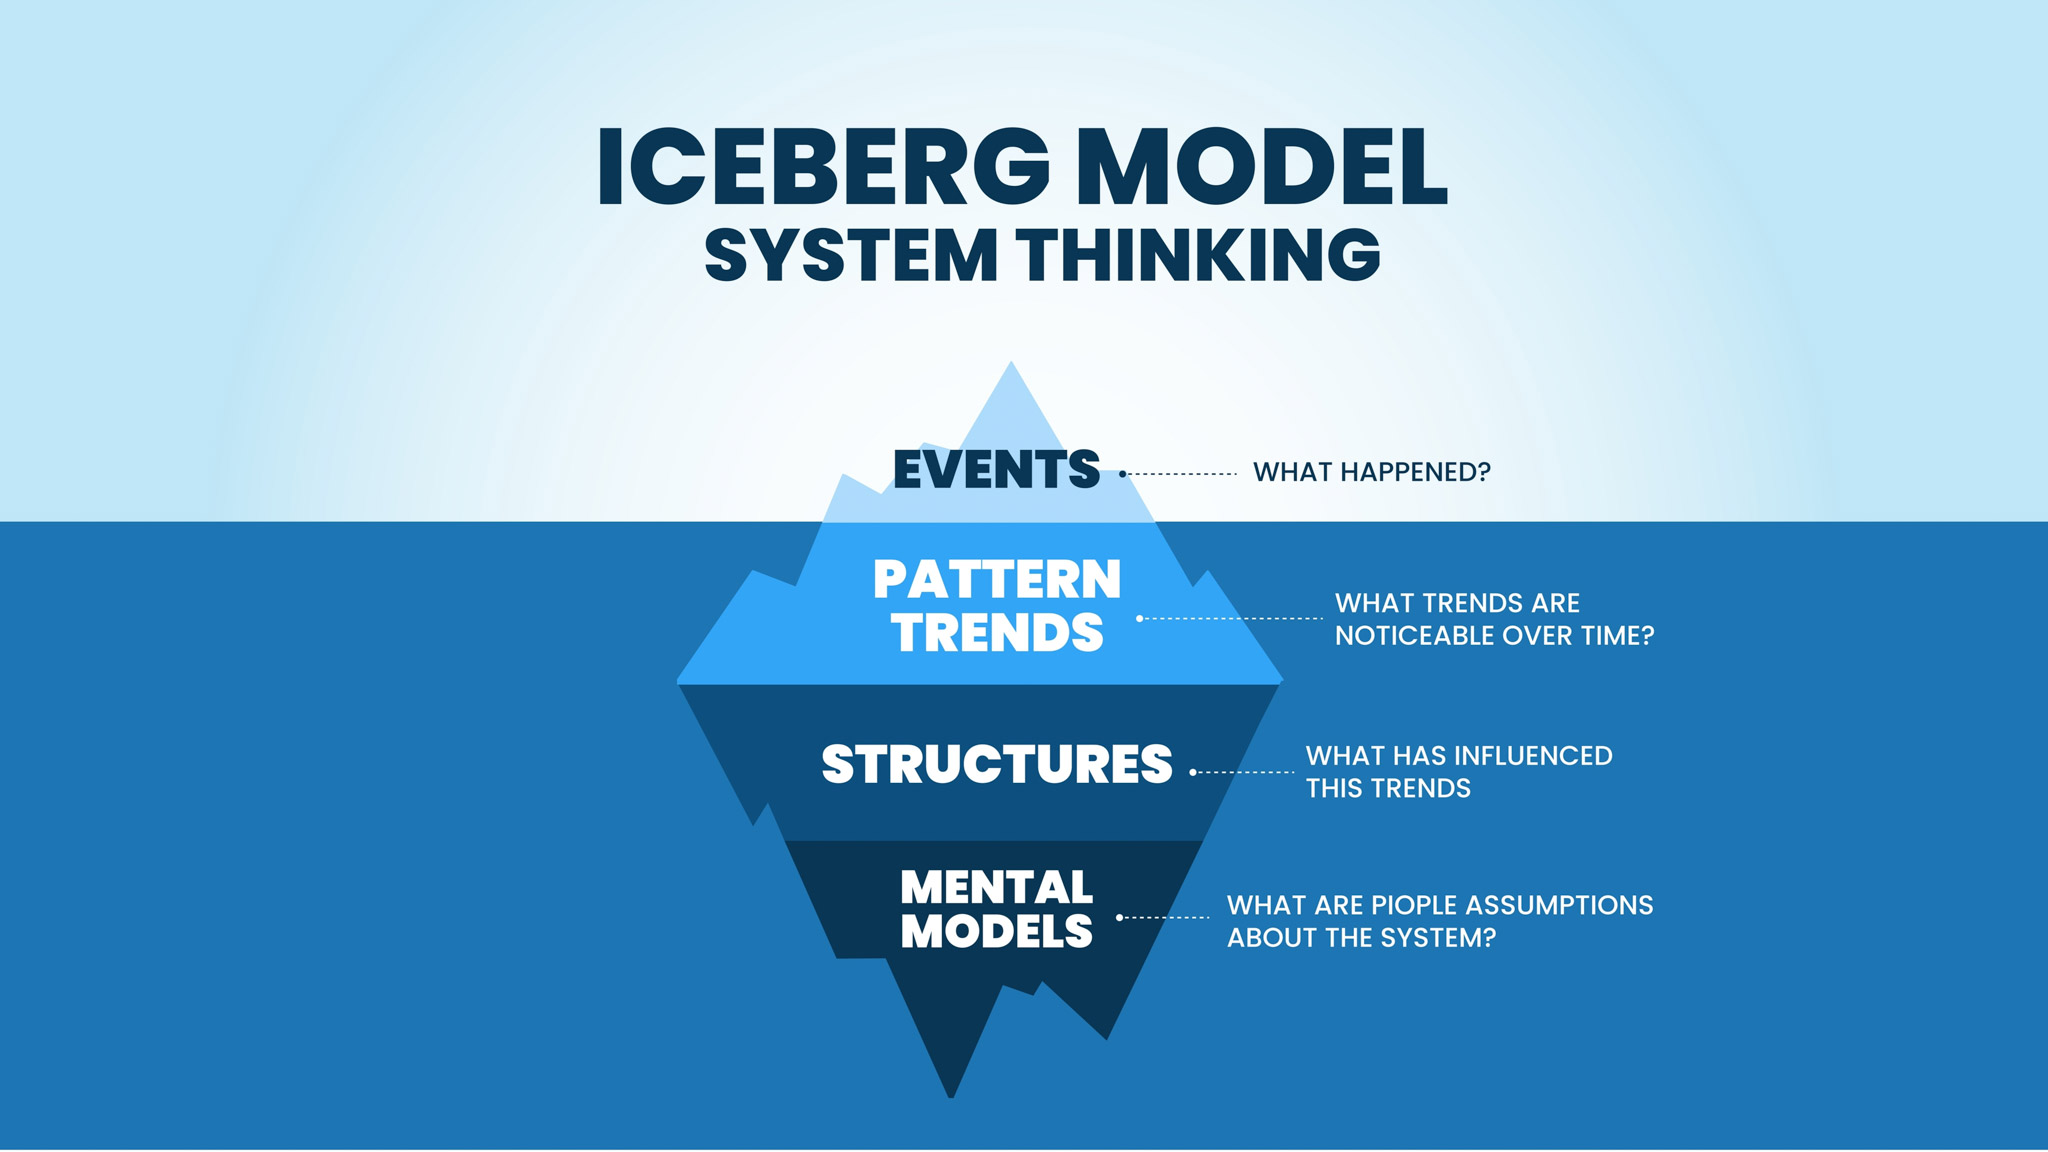 Iceberg model of systems thinking. 4 levels, events, pattern trends, structures, and mental models. But only 'events' is above the water.